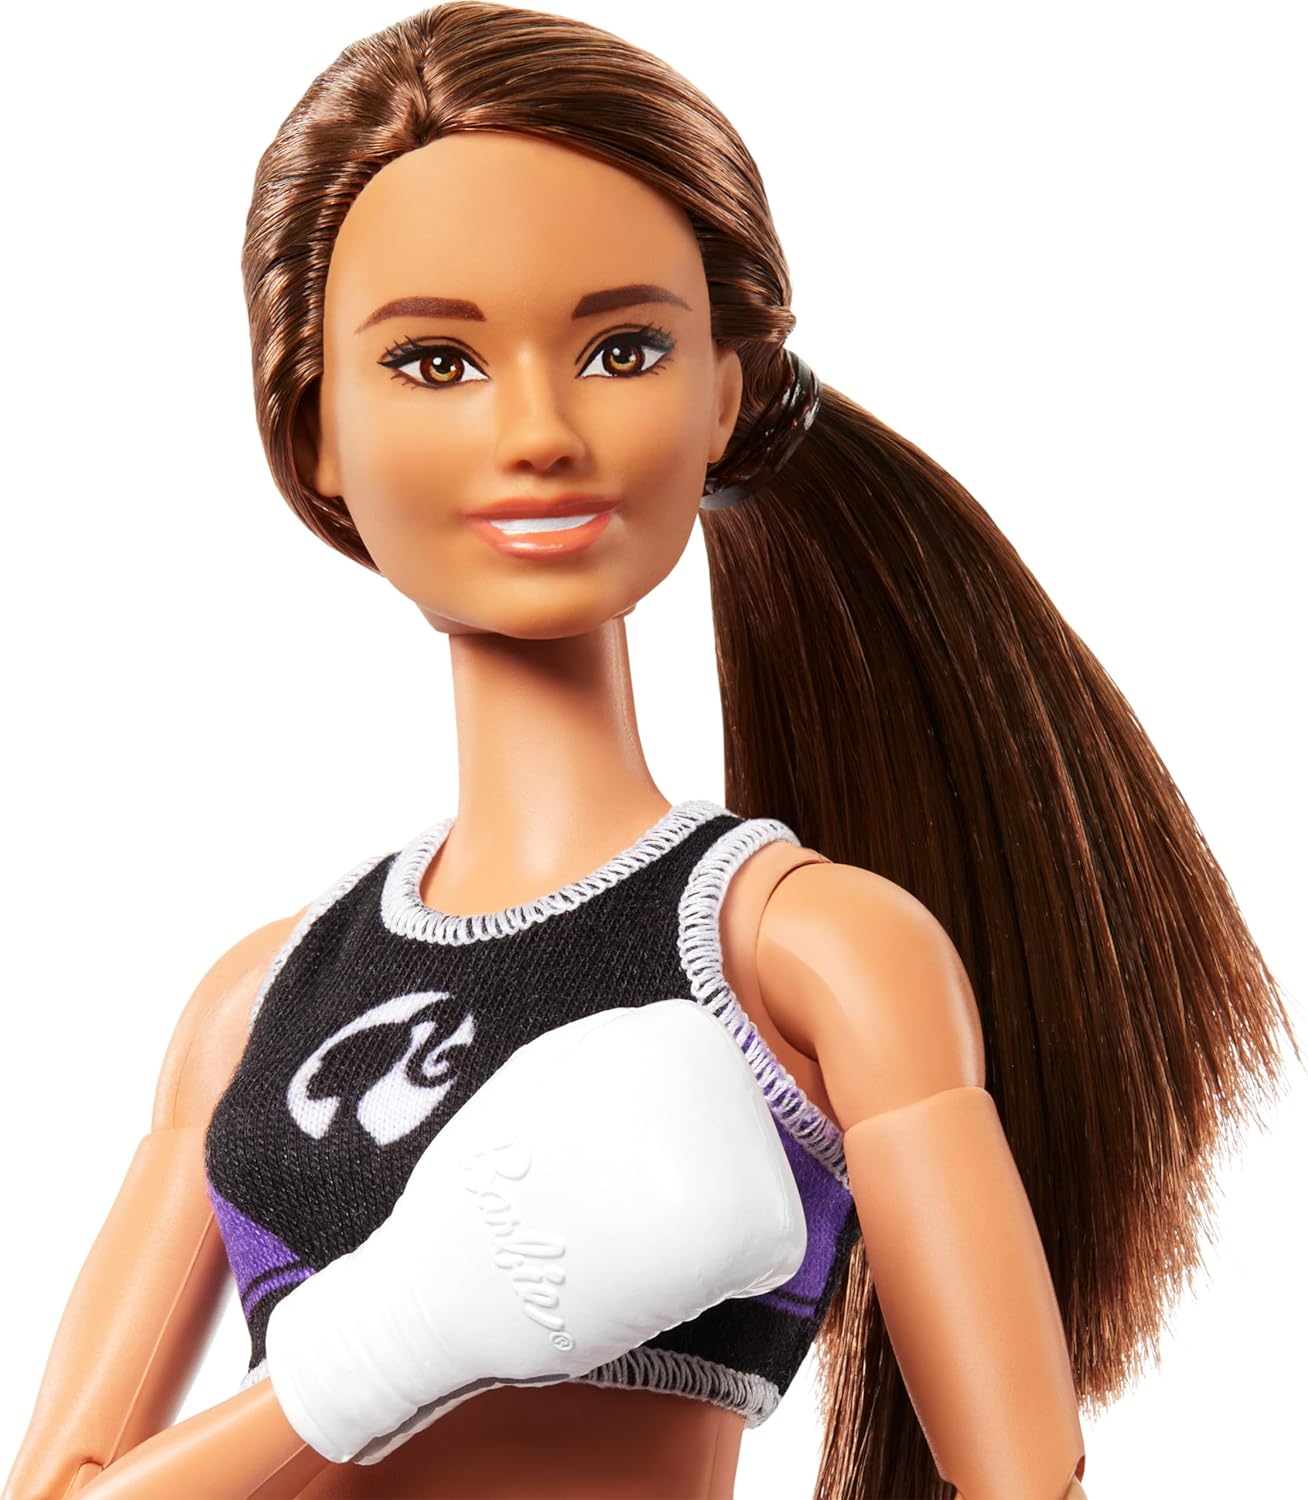 Barbie Made to Move Brunette Boxer Doll